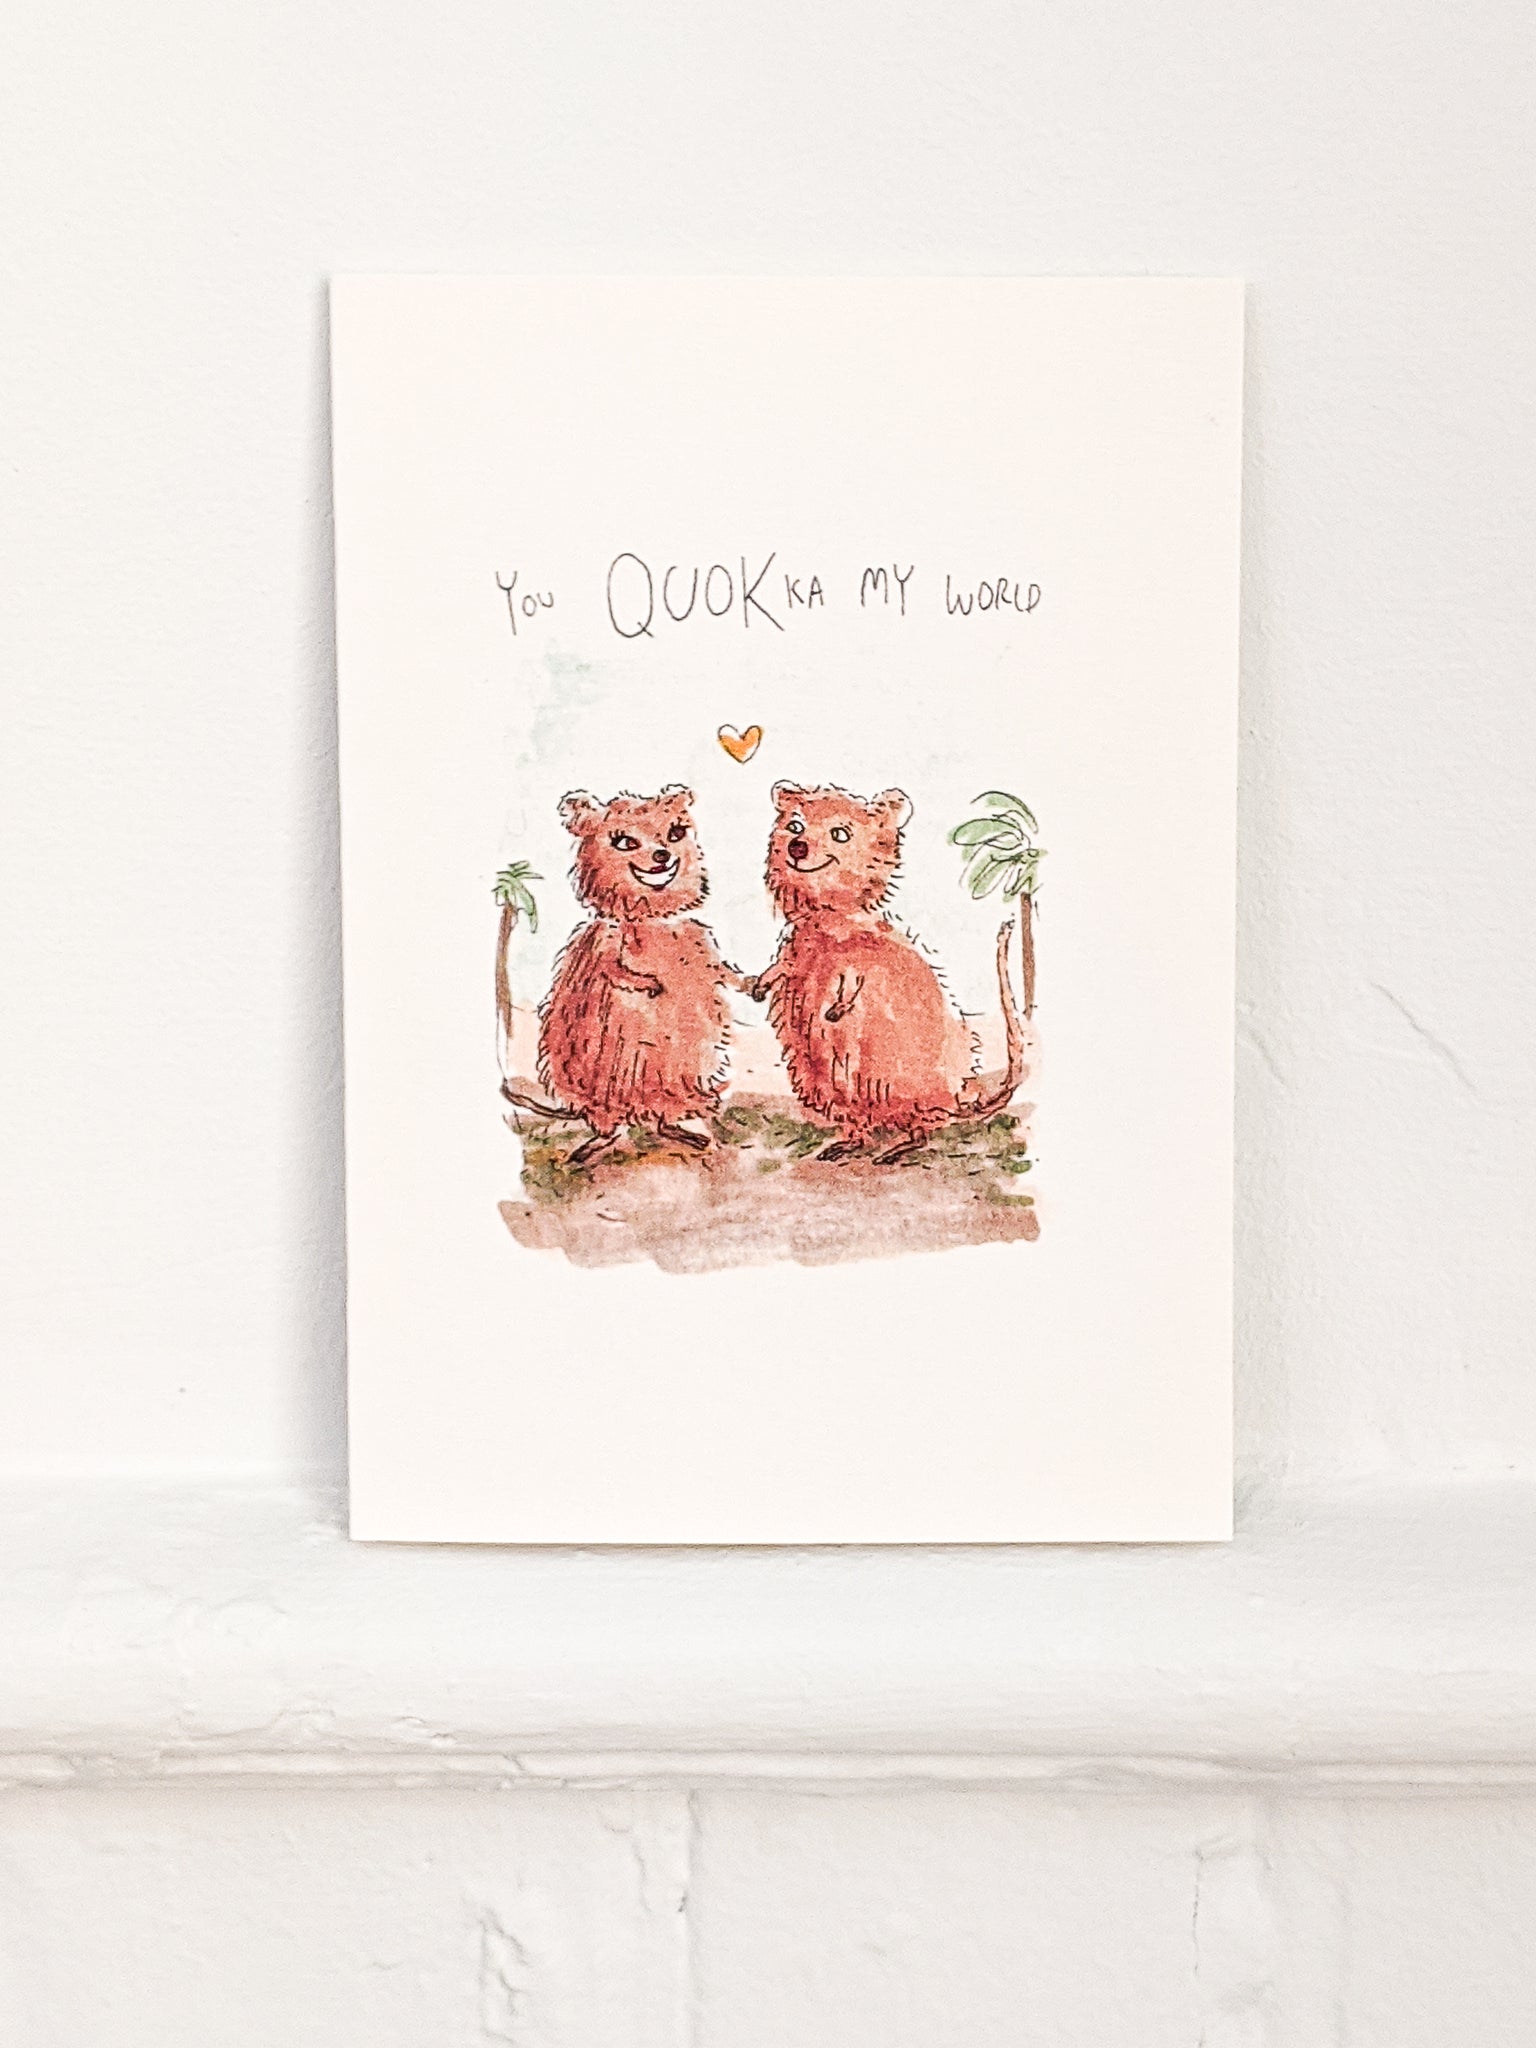  You Quokka My World | lovely card |  hand-made card | cards